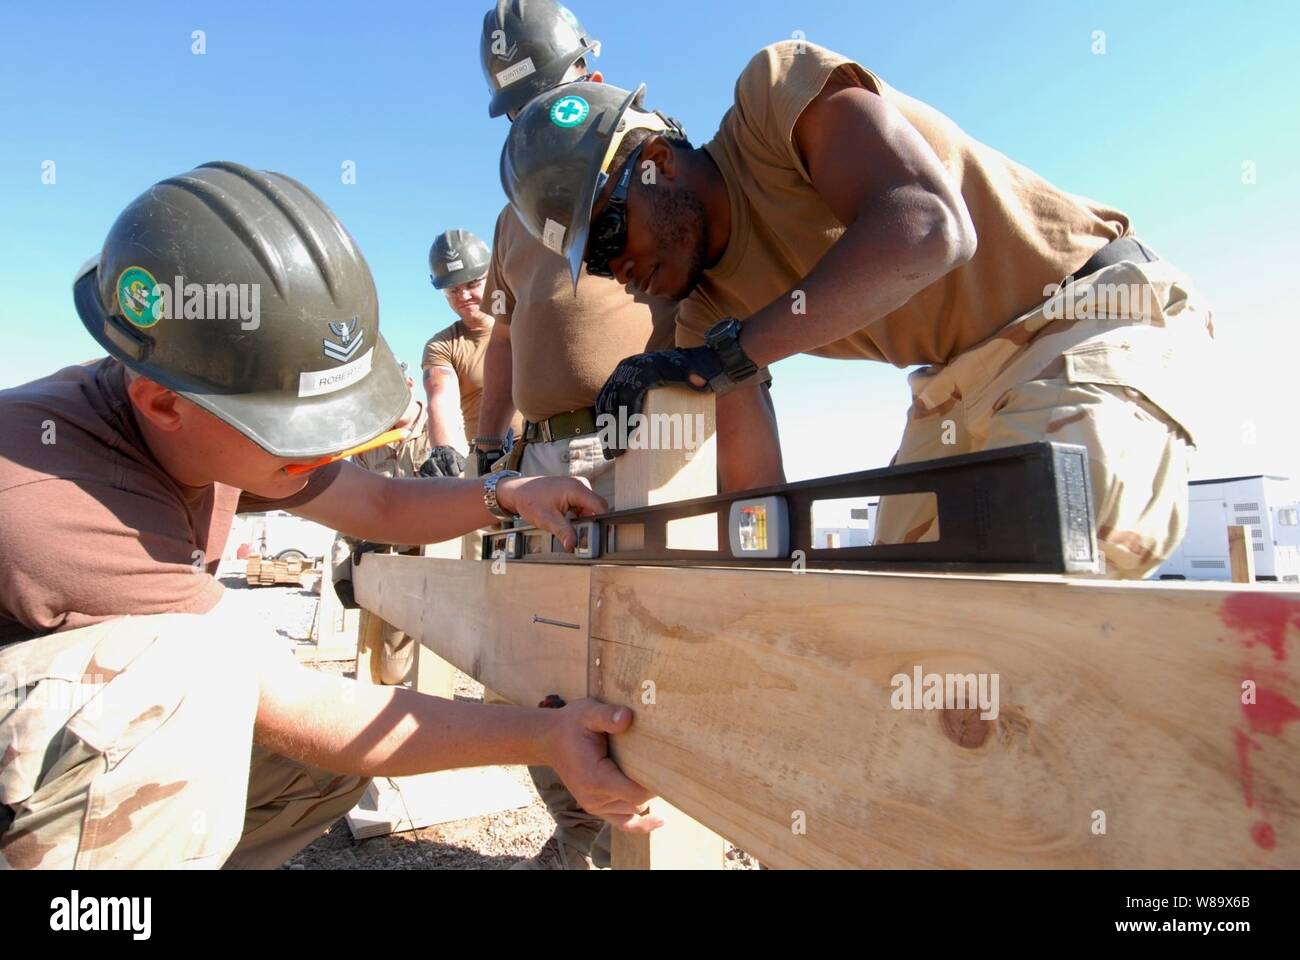 U.S. Navy Petty Officer 2nd Class Jeffrey Roberts uses a level to ensure a frame board is aligned properly as Seaman Michael Joseph holds it in place while making improvements to a patrol base in Mahawil, Iraq, on Feb. 4, 2009.  The Navy Seabees are from Amphibious Construction Battalion 2. Stock Photo